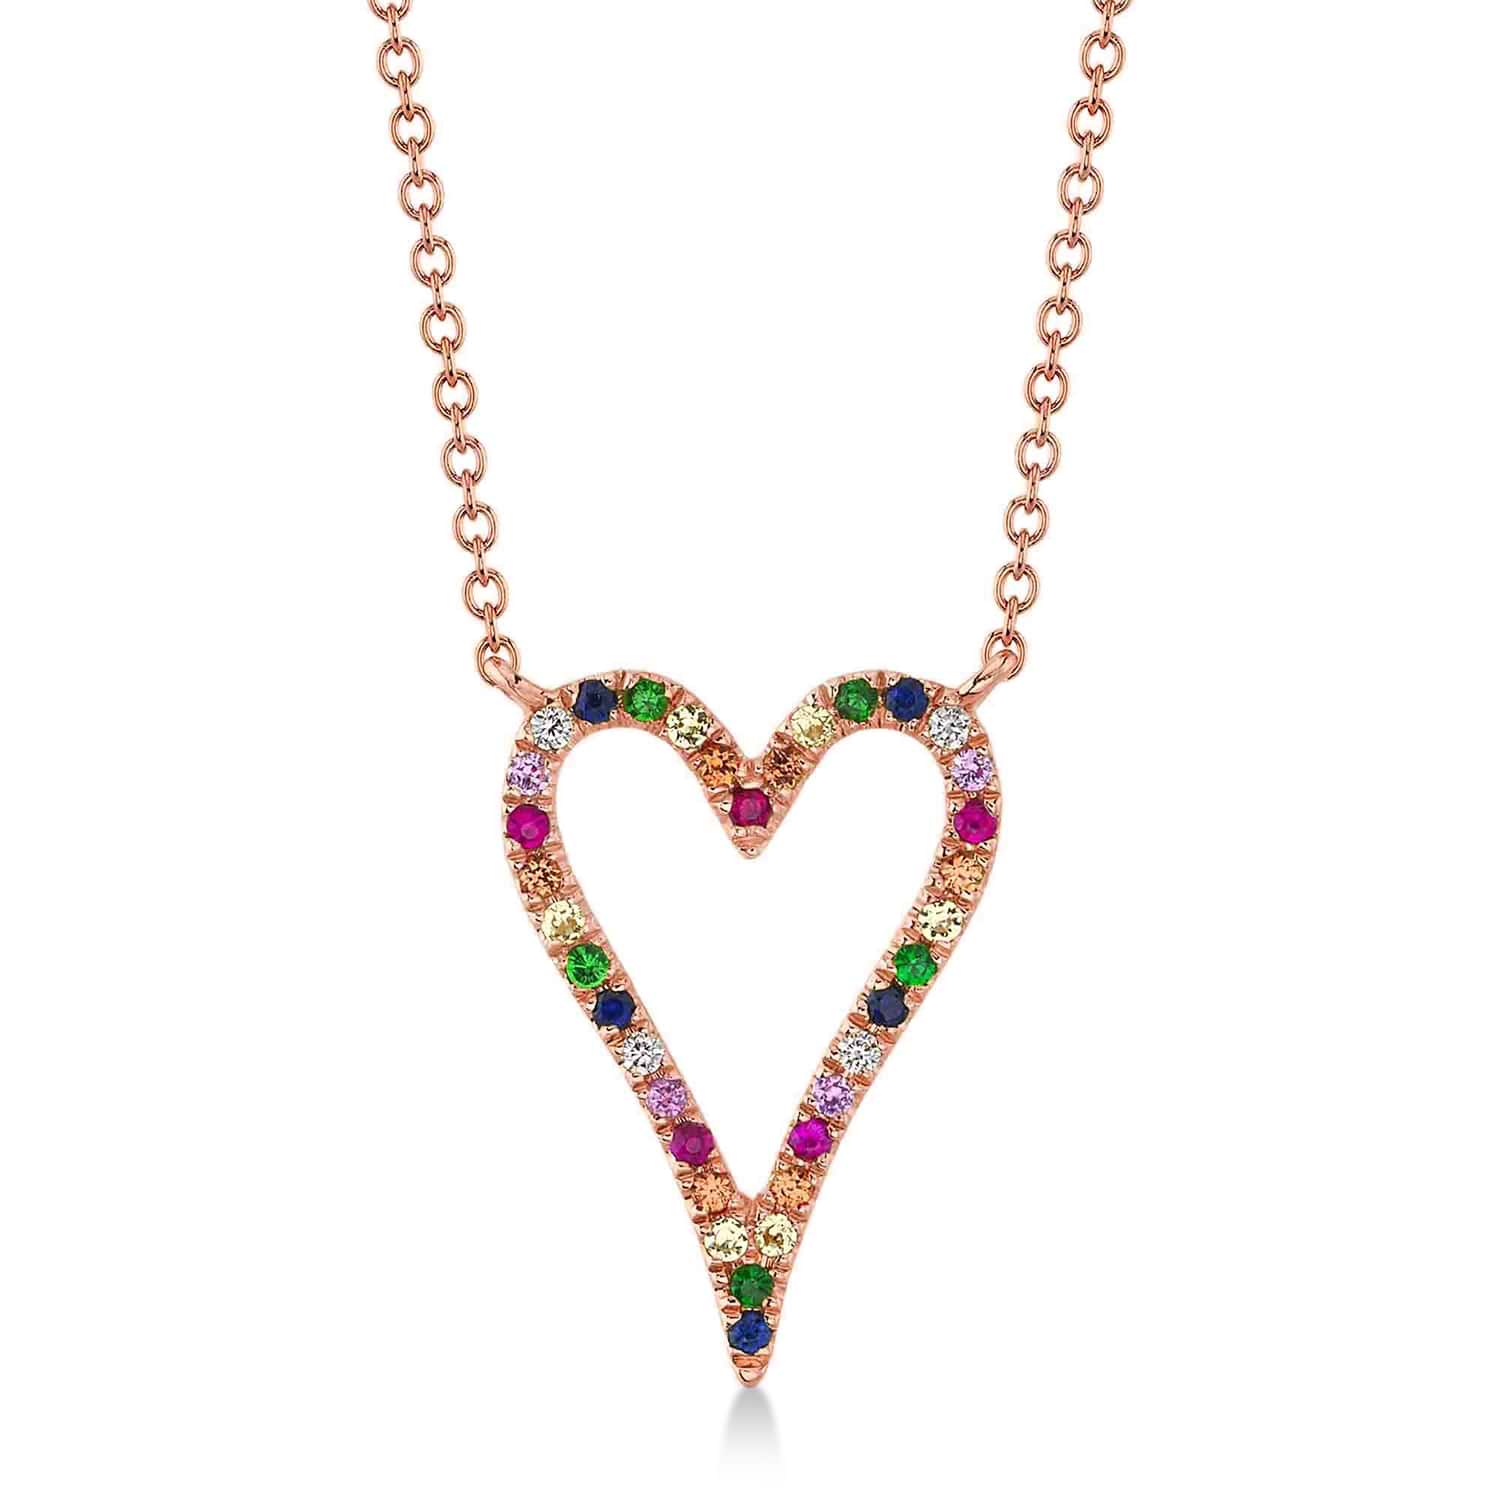 Diamond & Multi-Color Pave Heart Pendant necklace in 14K Rose Gold (0.22ct)